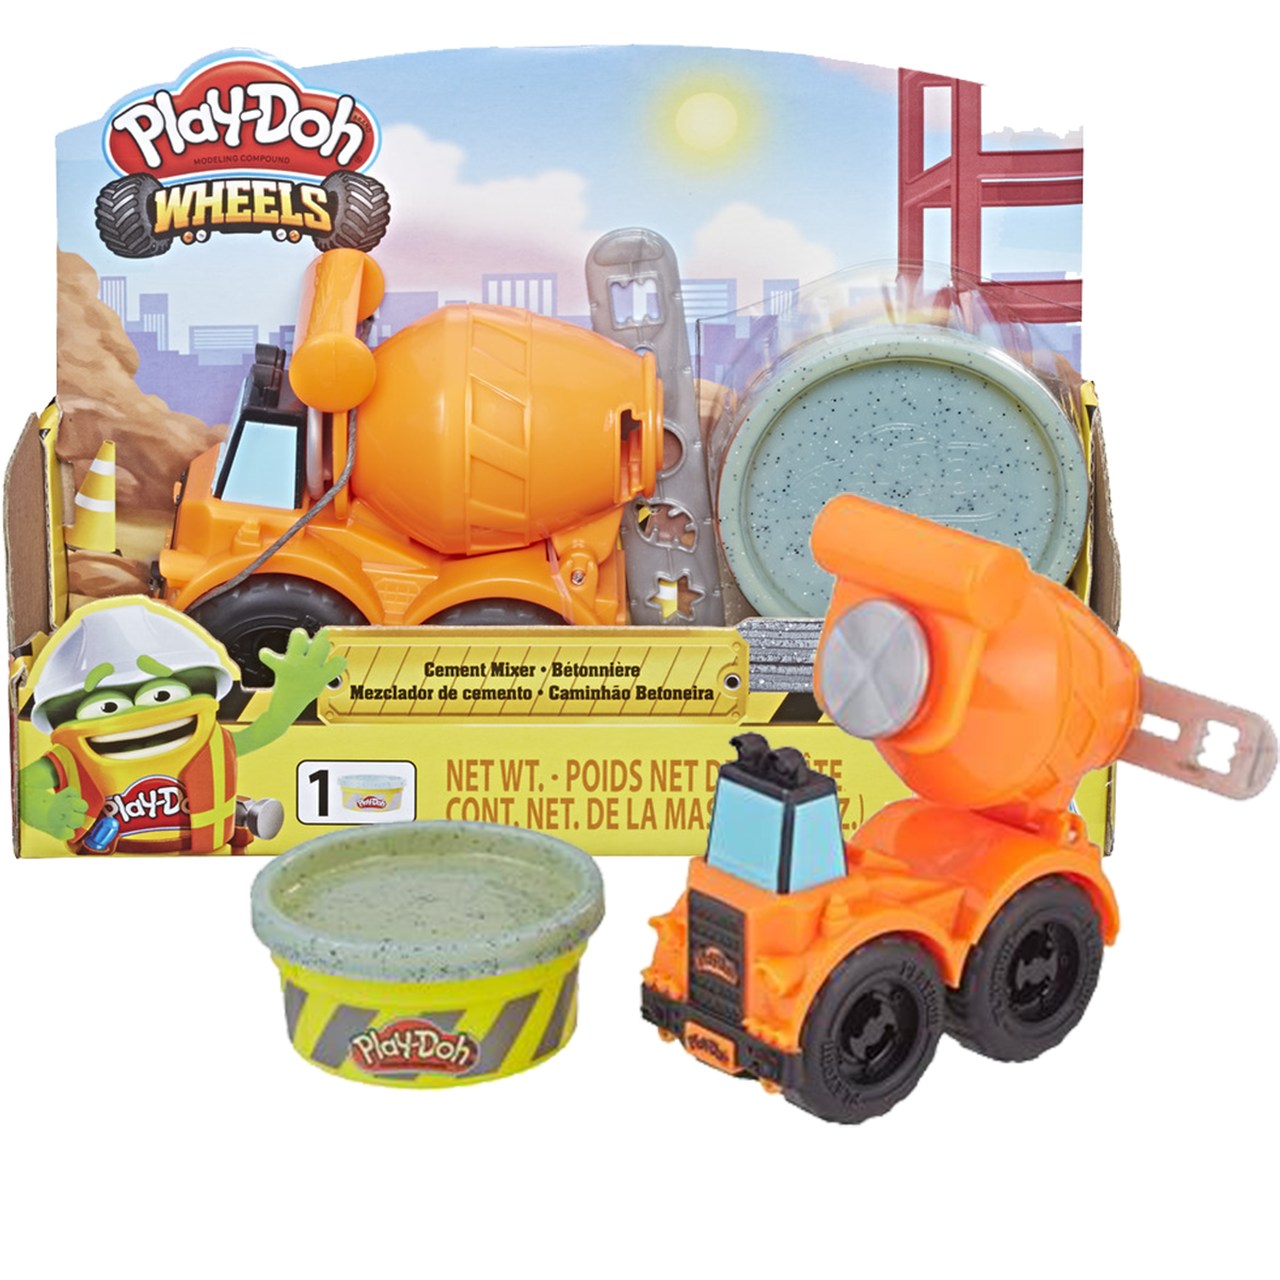 Play-Doh Wheels Mini Cement Truck Toy